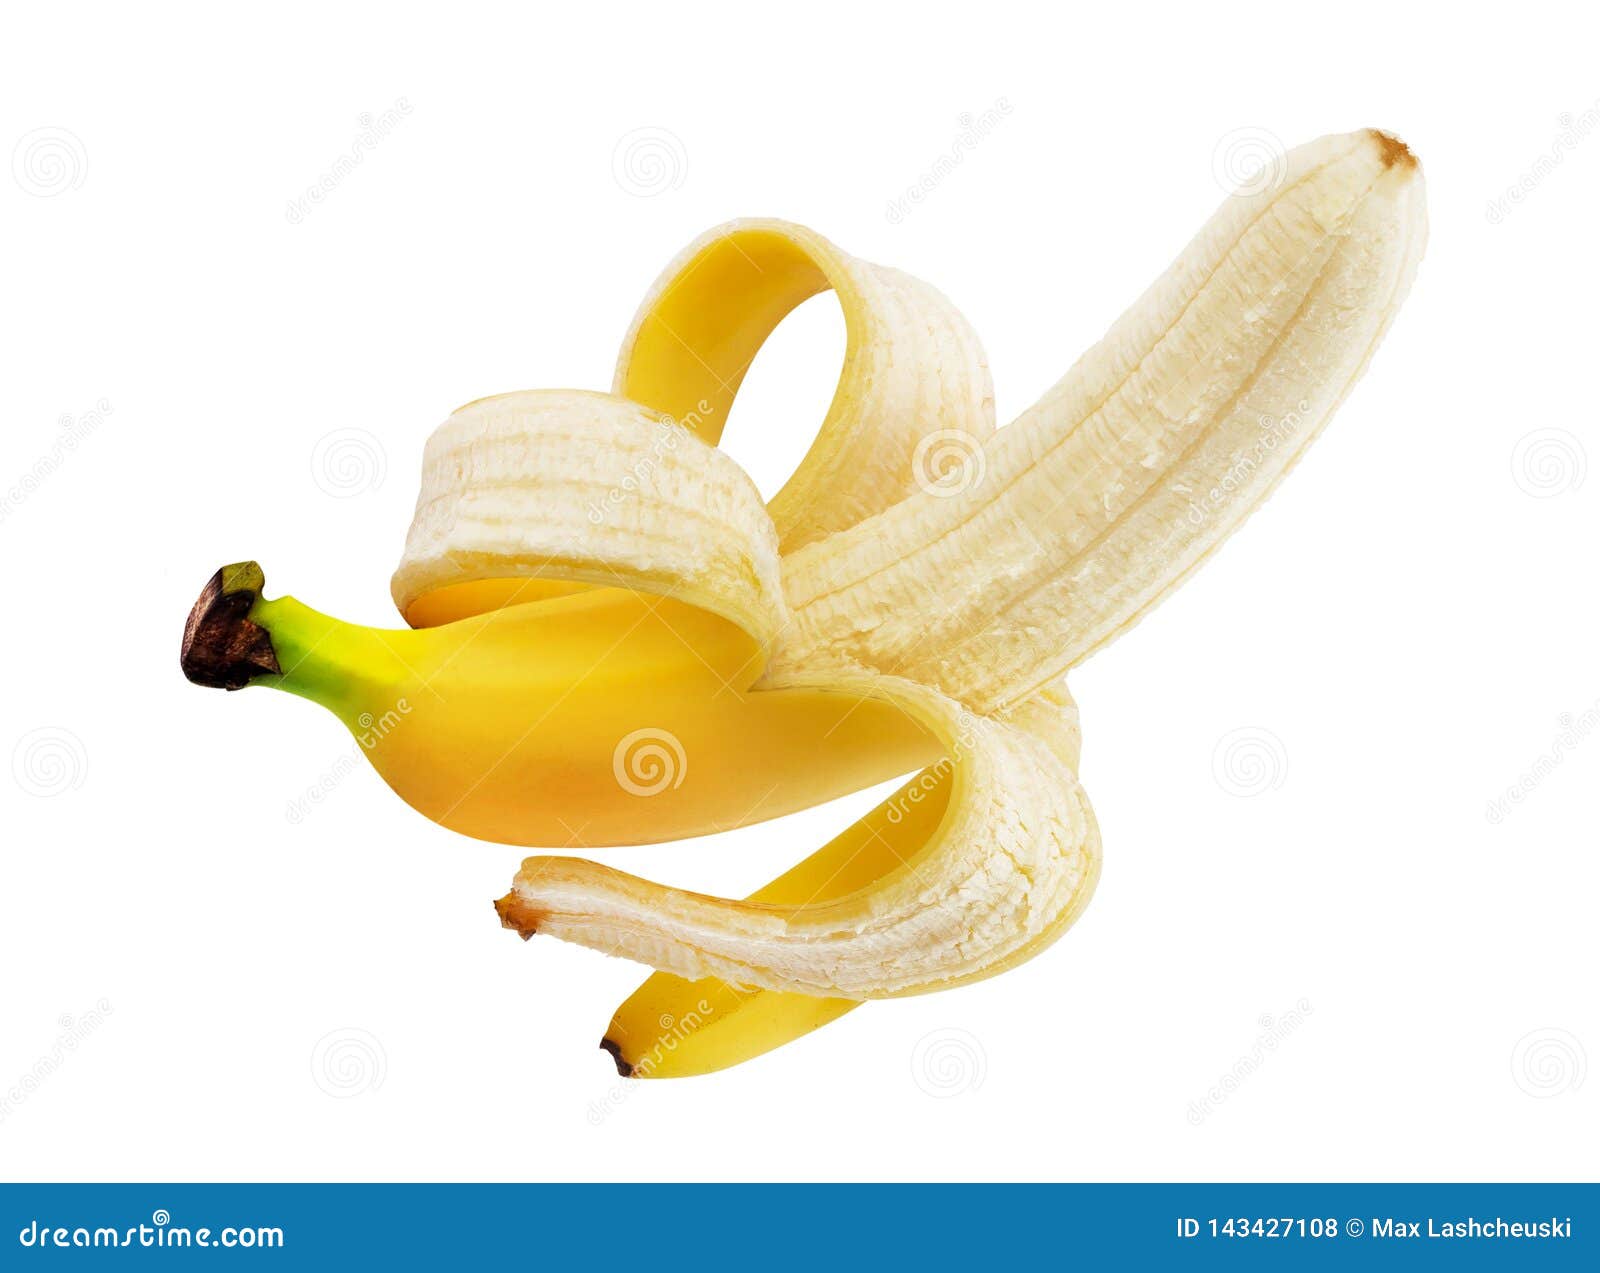 peeled-banana-isolated-white-background-clipping-path-one-open-143427108.jpg